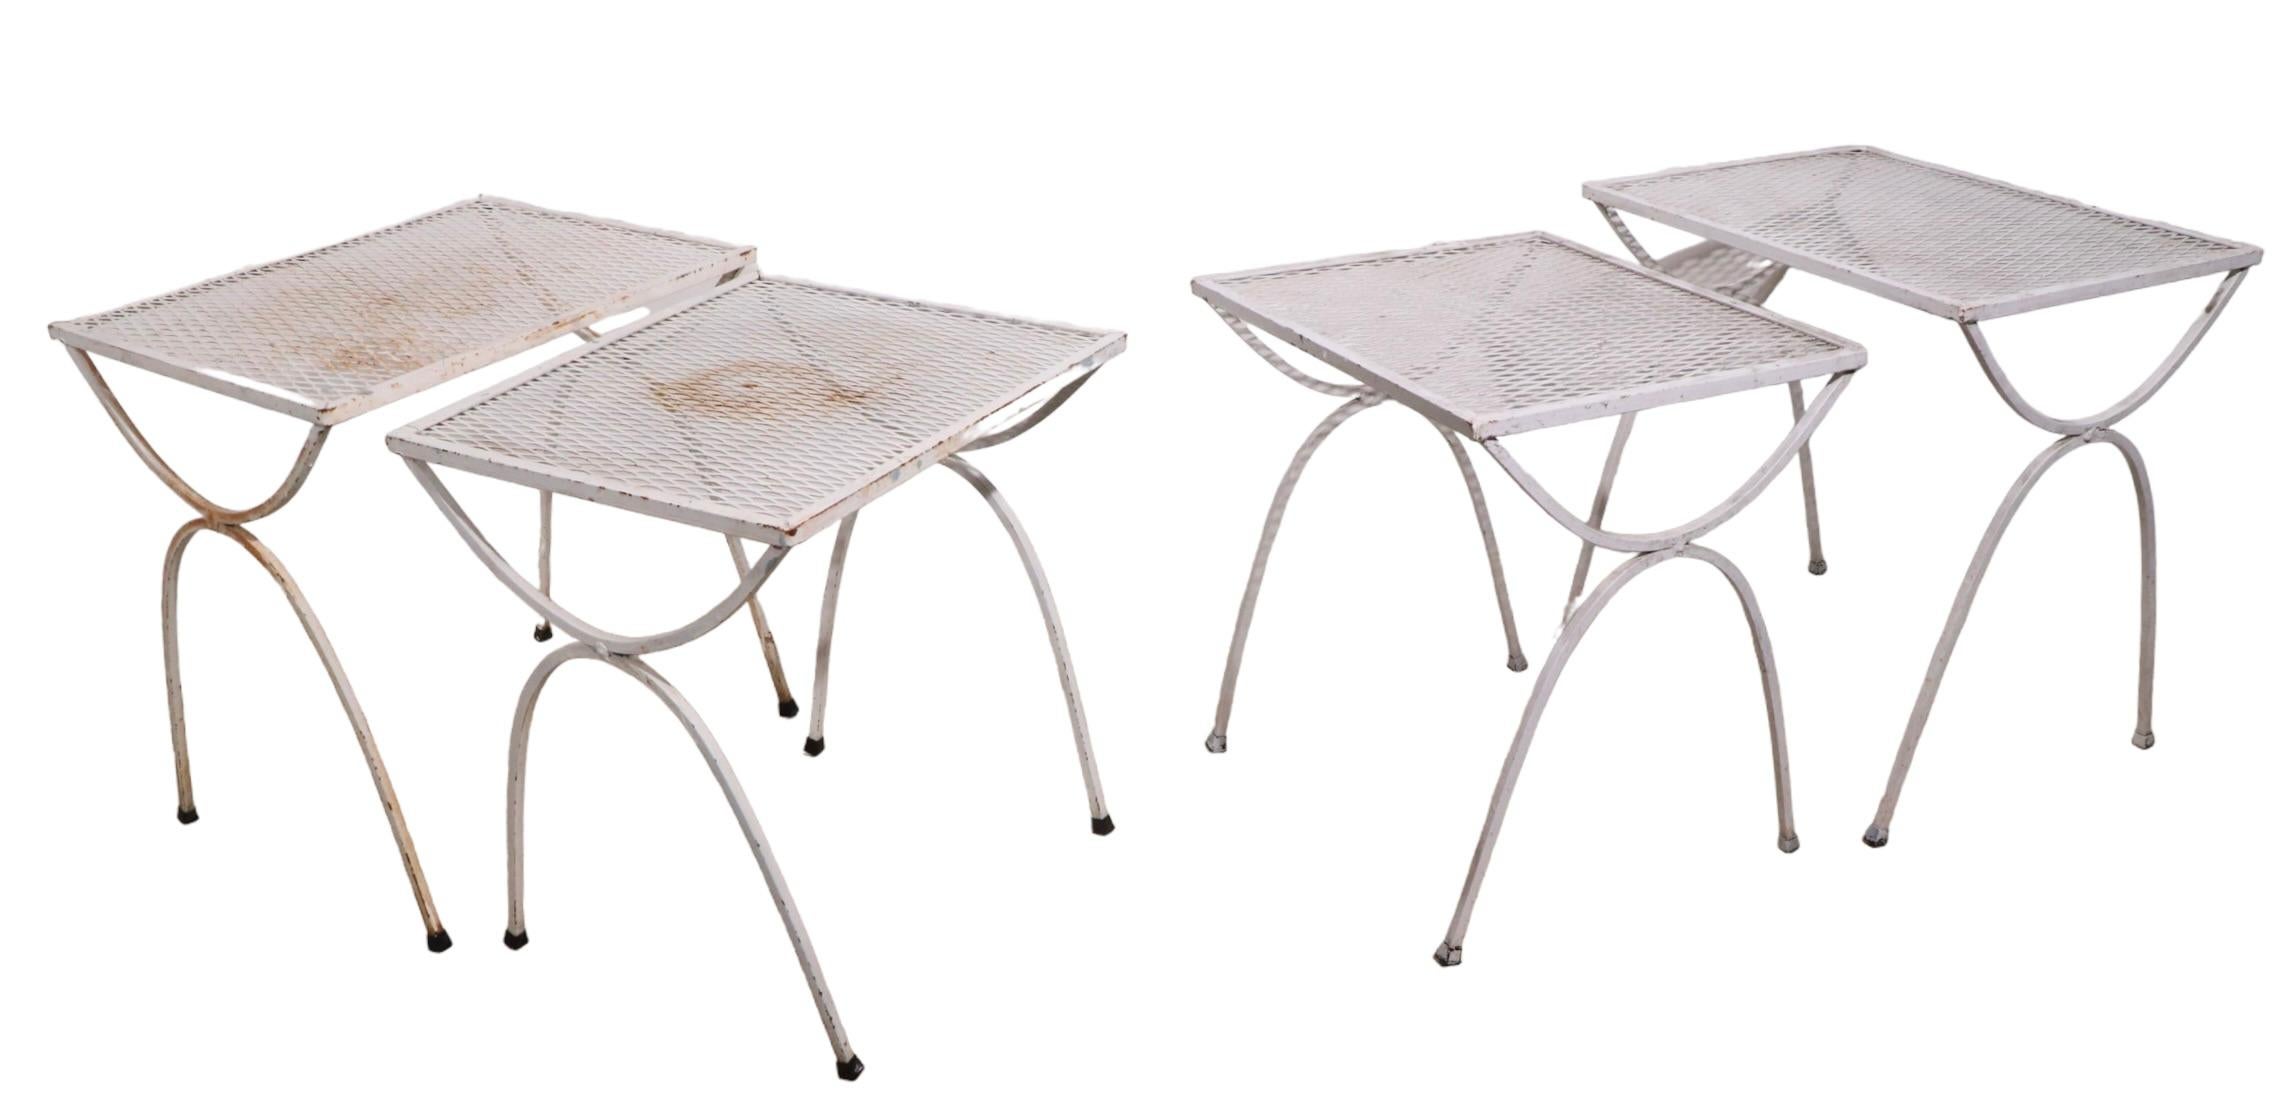 Mid-Century Modern Two Piece Garden Patio Poolside Nesting Tables by Salterini 2 Sets Available For Sale